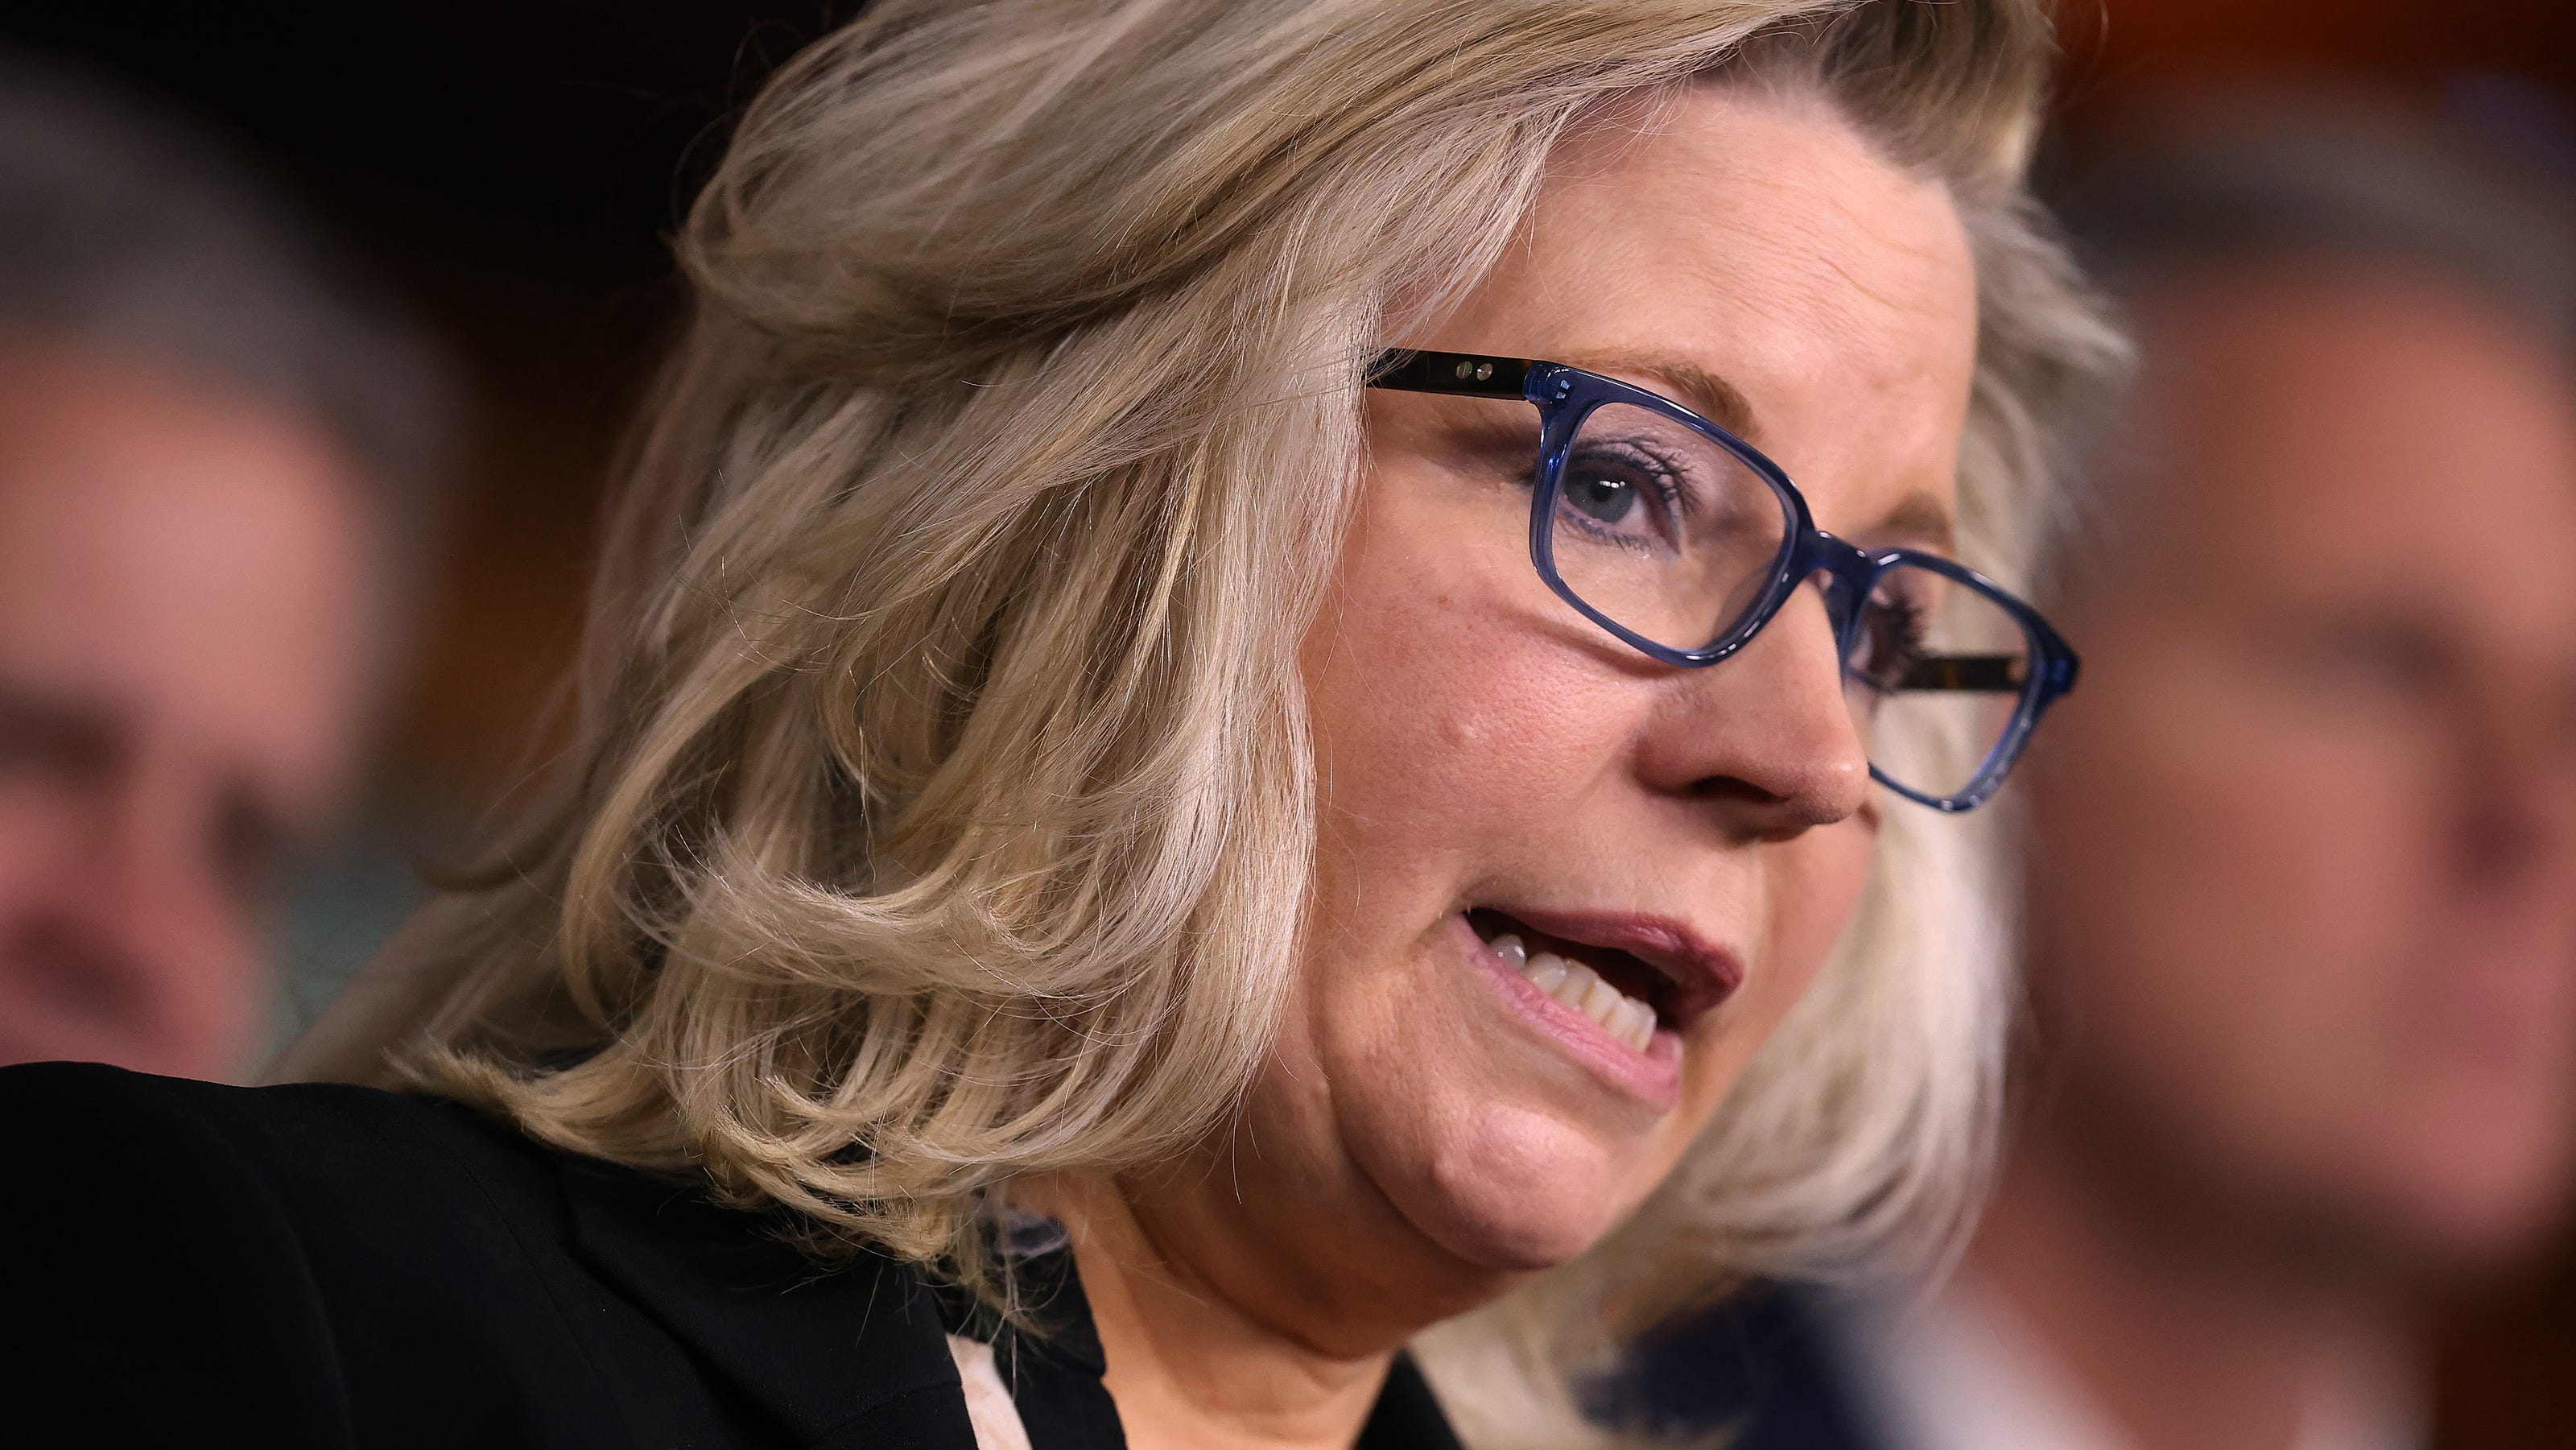 Liz Cheney's ouster should alarm all fact-based Americans who believe in our country